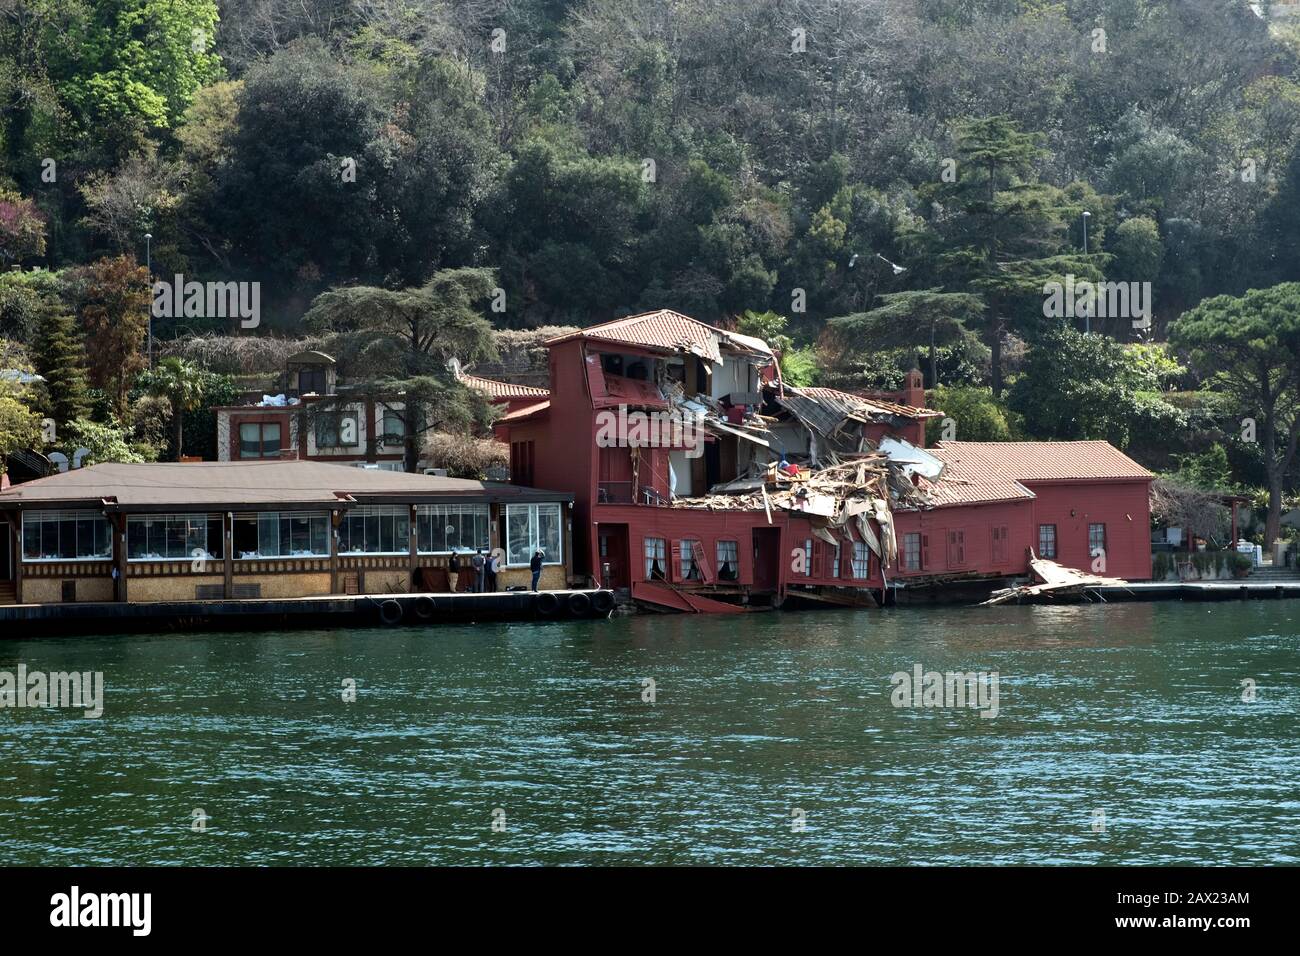 2018 ,April 10 - Istanbul.  A cargo ship has crashed into a historic mansion on Istanbul’s Bosporus Strait, severely damaging the building, In April 2 Stock Photo